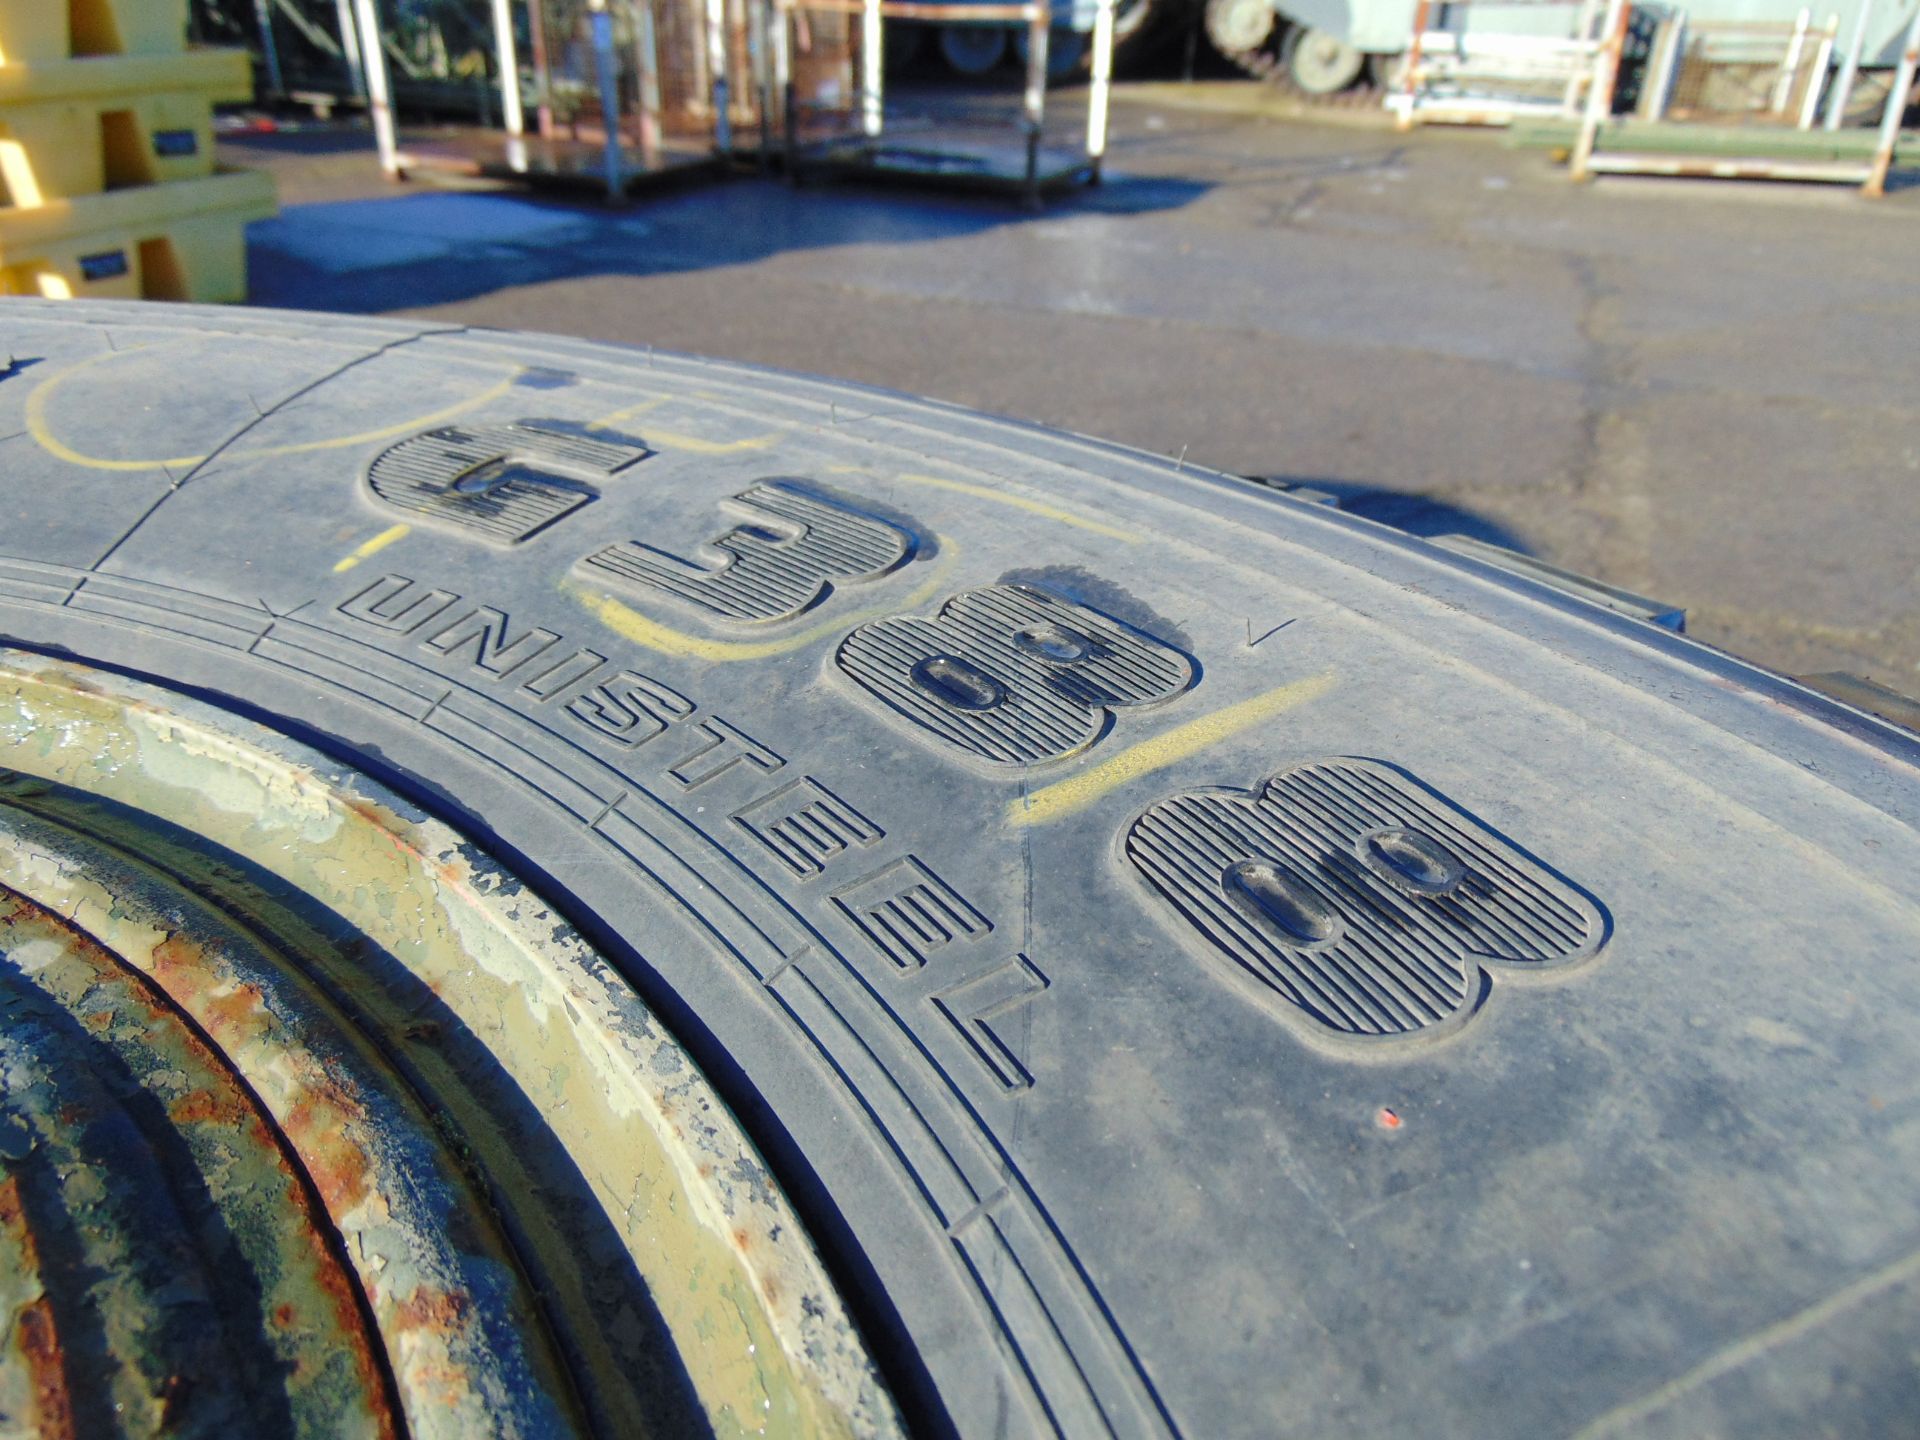 Qty 4 x Goodyear 12.00R20 G388 Unisteel tyres, unused still with bobbles fitted on 8 stud rims - Image 7 of 8